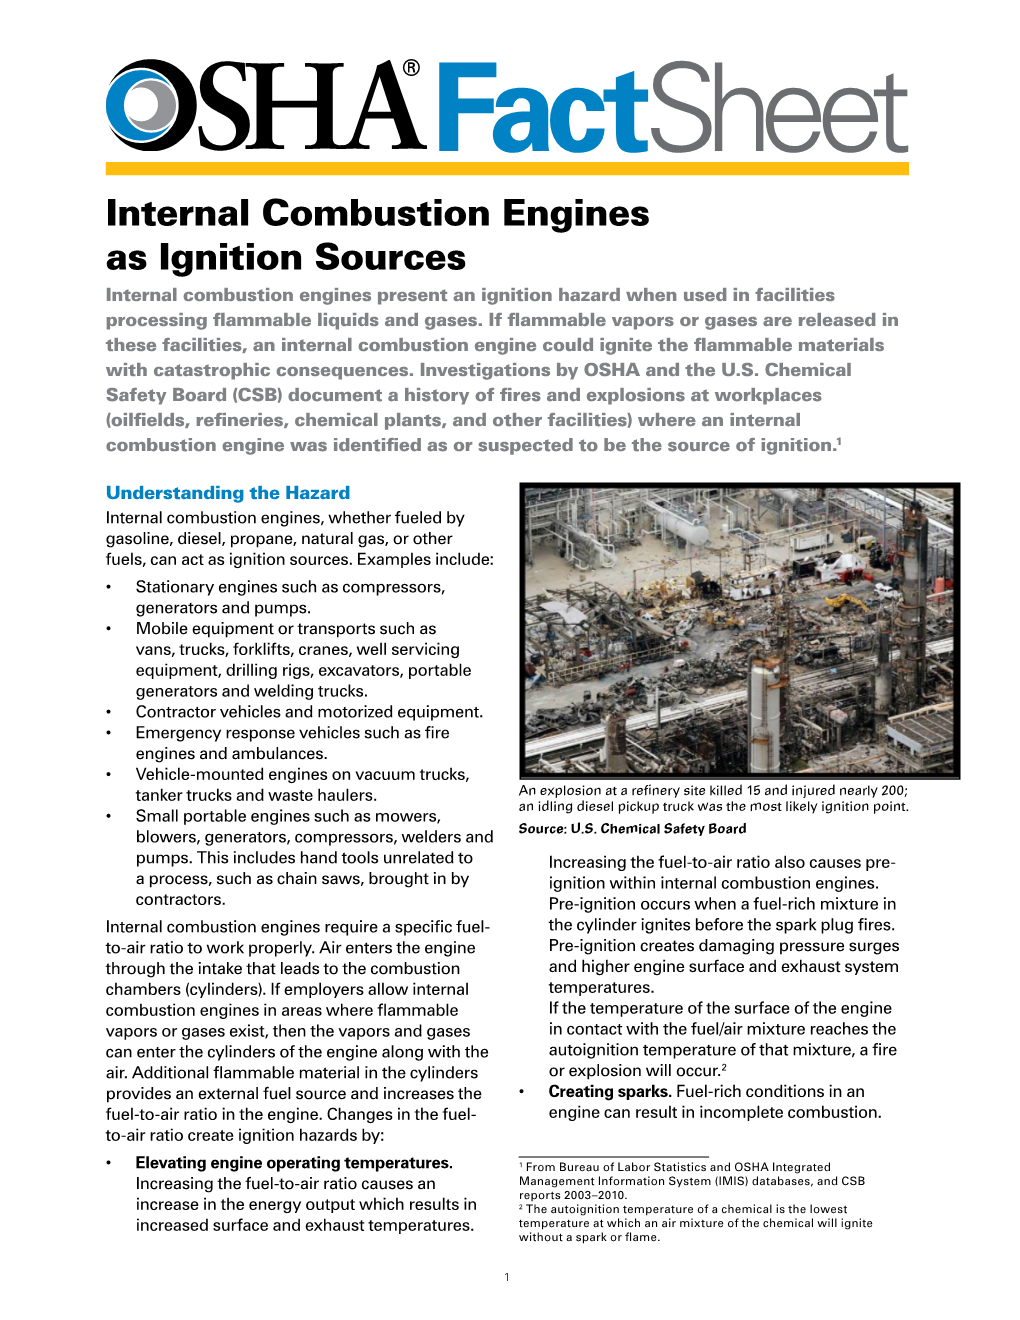 Internal Combustion Engines As Ignition Sources Internal Combustion Engines Present an Ignition Hazard When Used in Facilities Processing Flammable Liquids and Gases